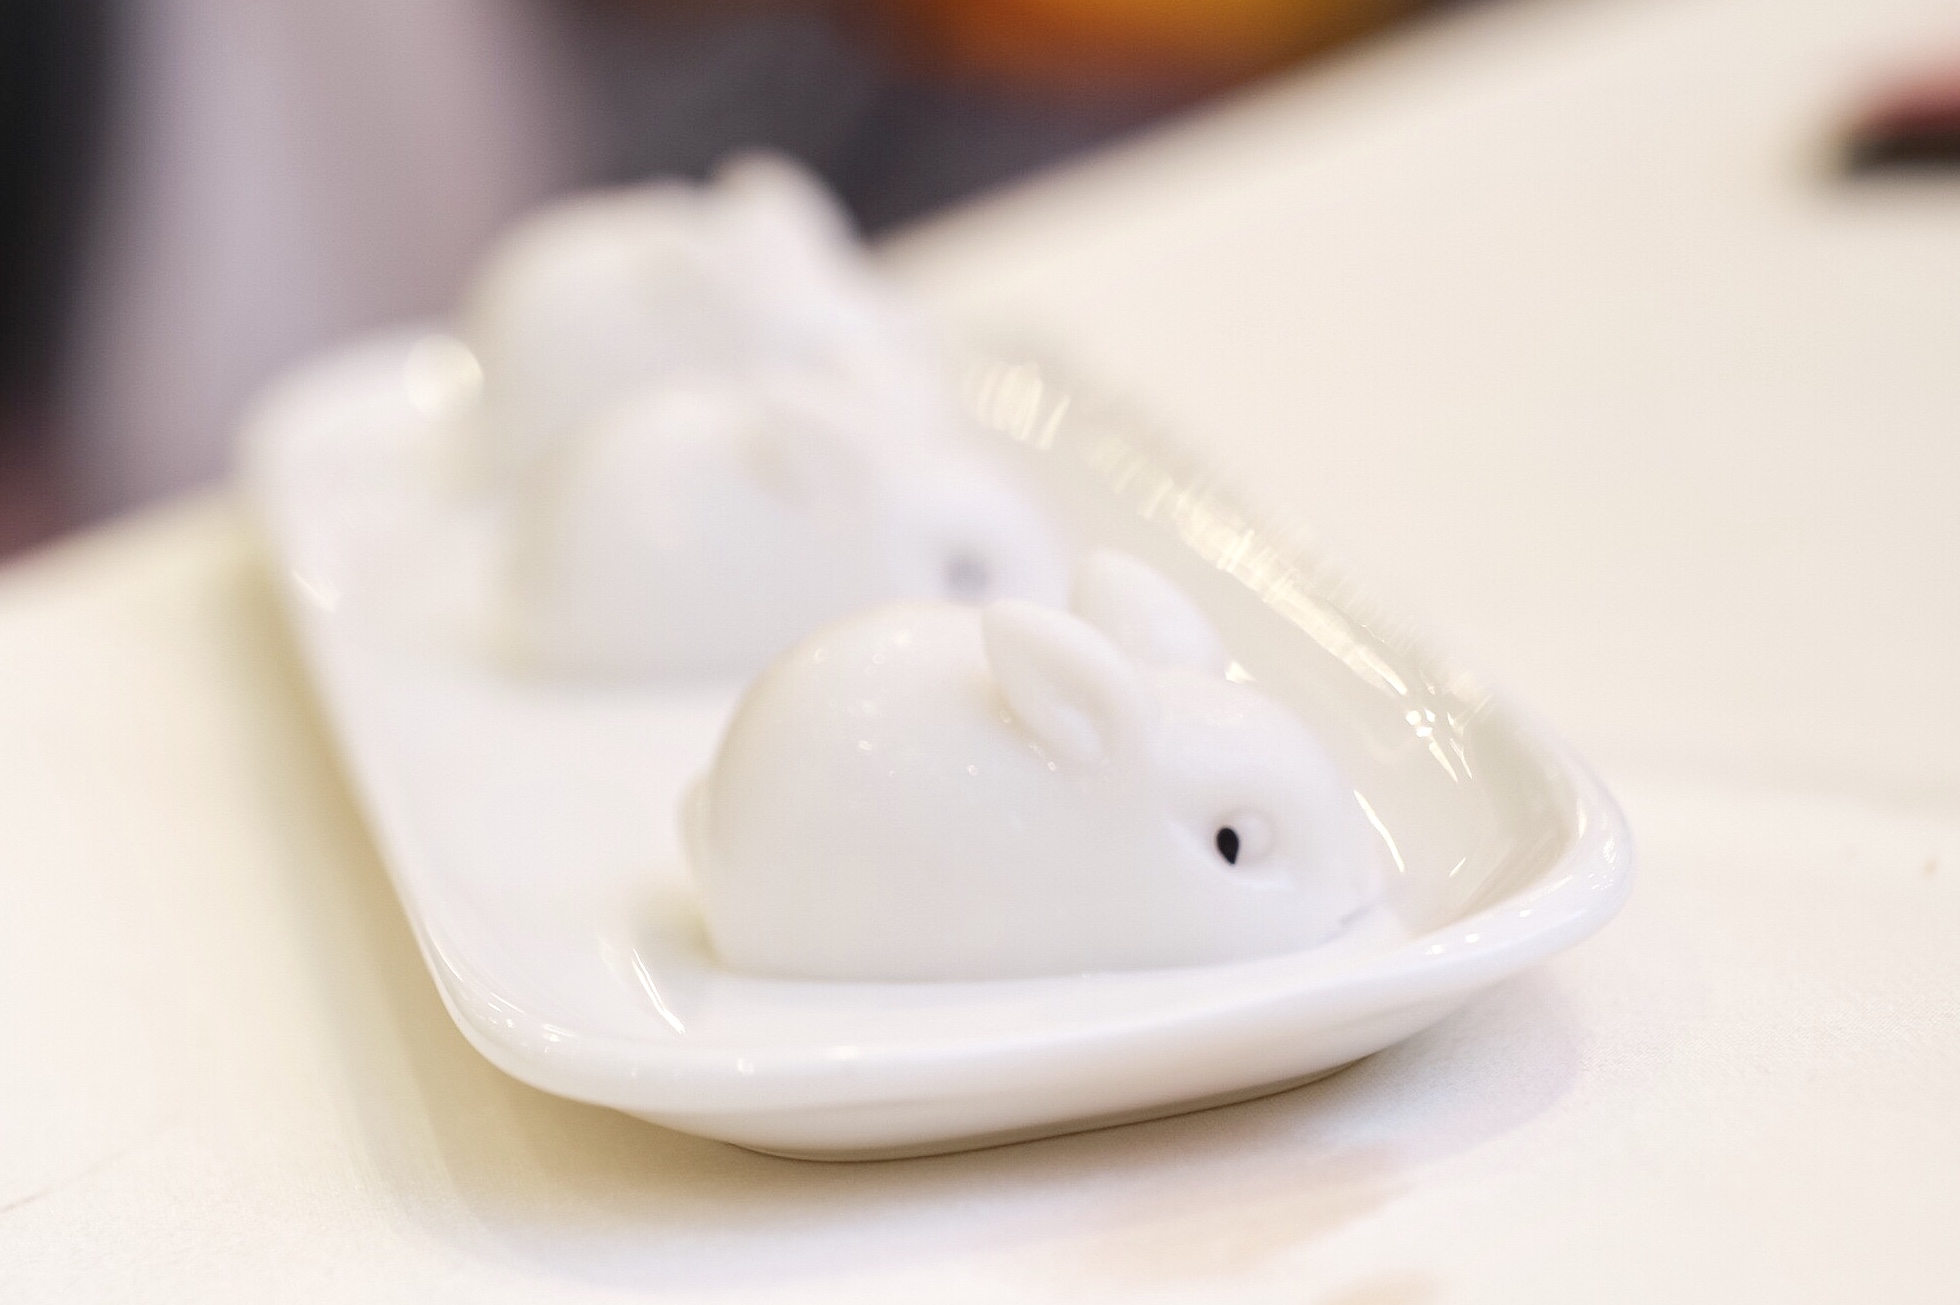 Chilled Coconut Pudding "Bunnies"